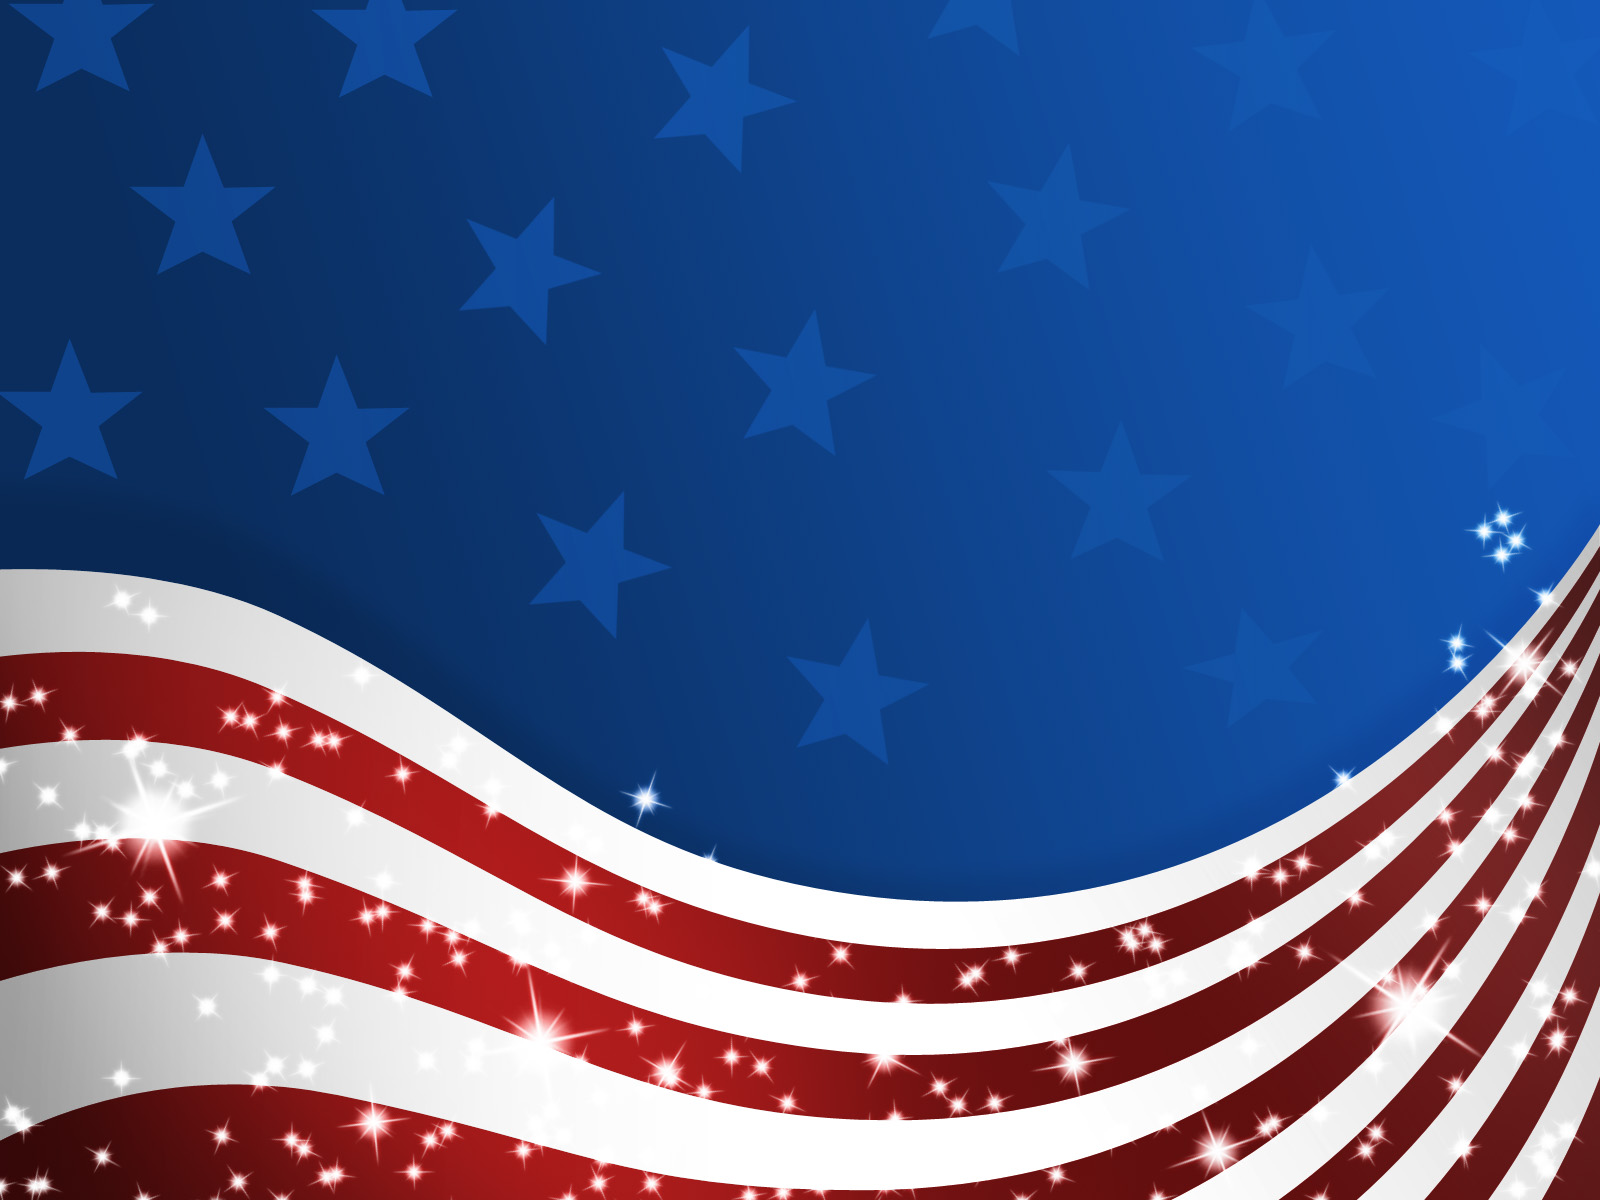 Cool Patriotic Background Images Pictures   Becuo